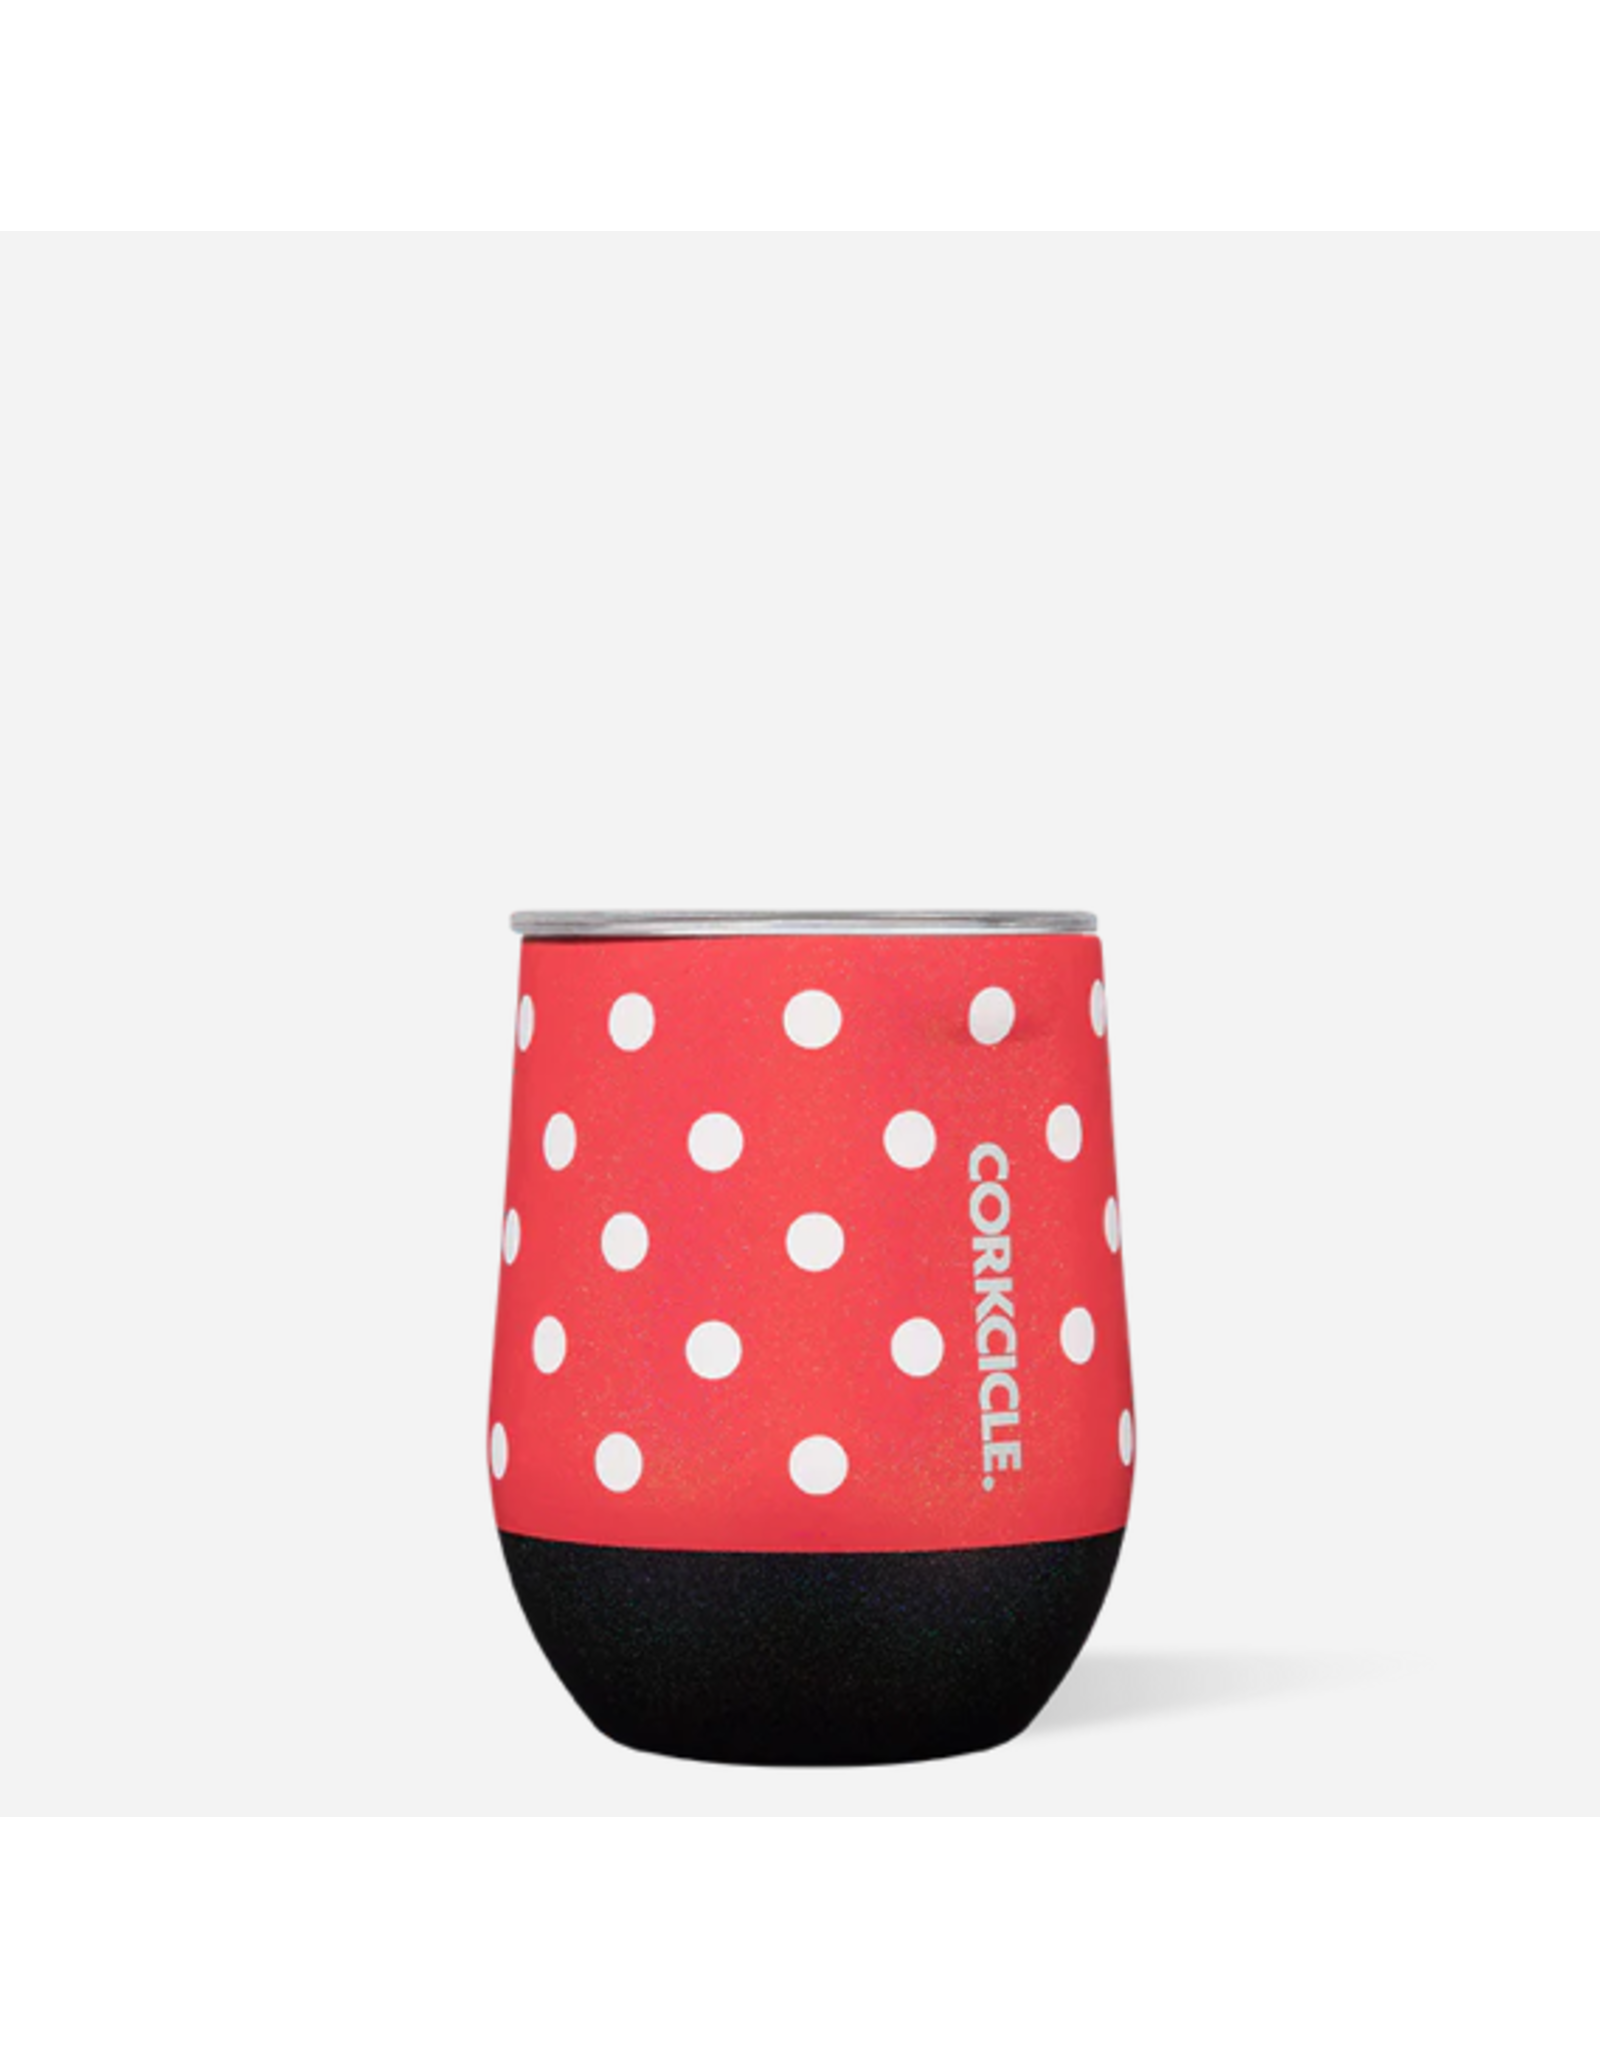 Corkcicle Minnie Mouse Polka Dot Red Stemless 12oz